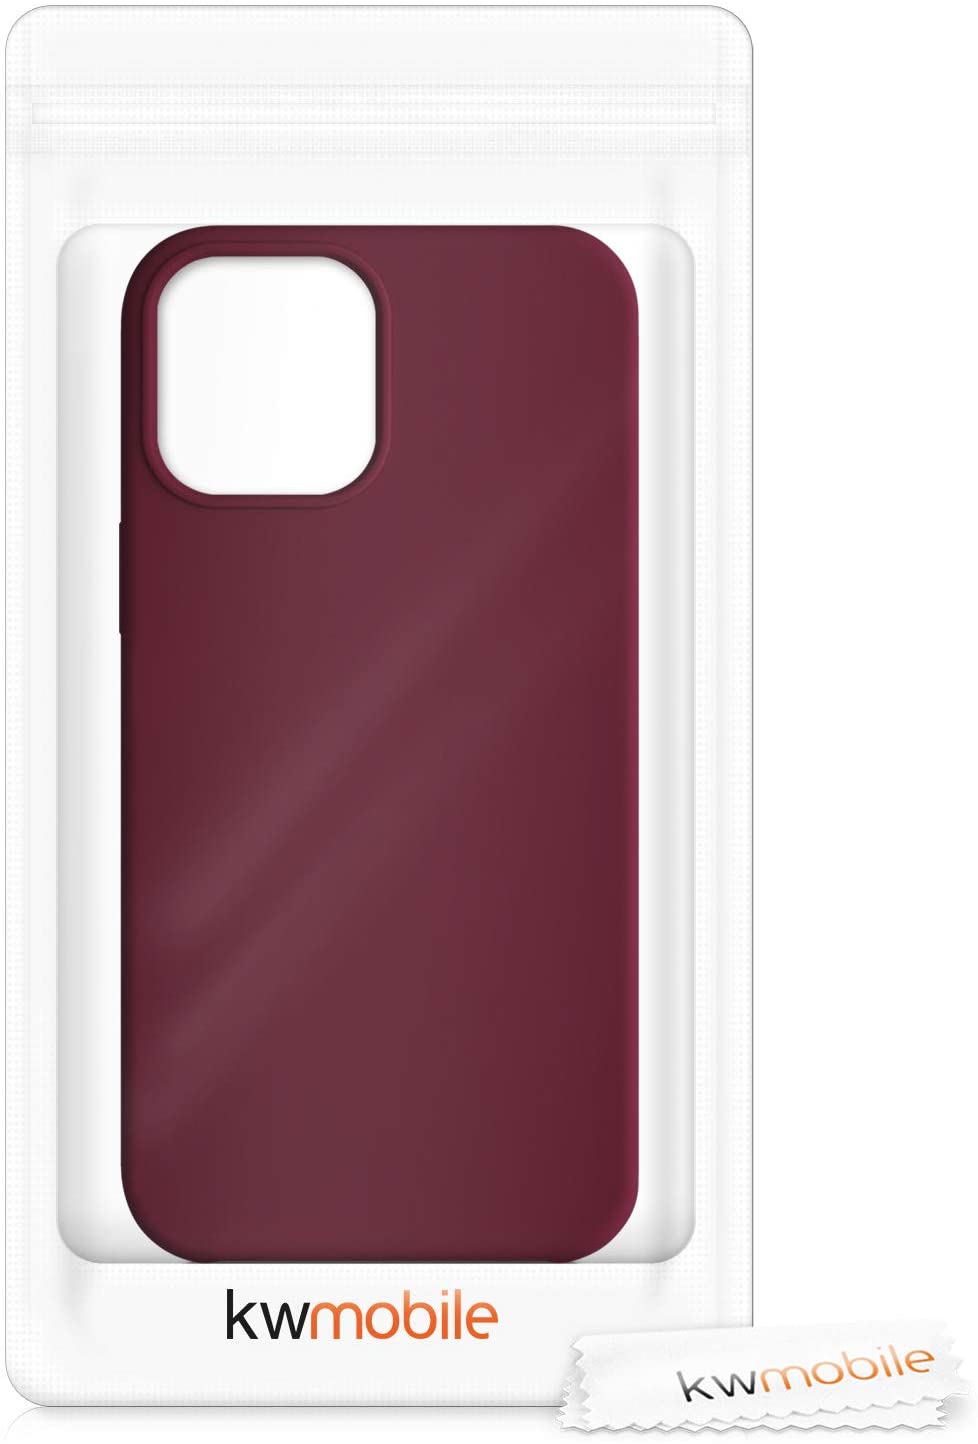 kwmobile TPU Silicone Case Compatible with Apple iPhone 12 Pro Max - Case Slim Protective Phone Cover with Soft Finish - Rhubarb Red - e4cents